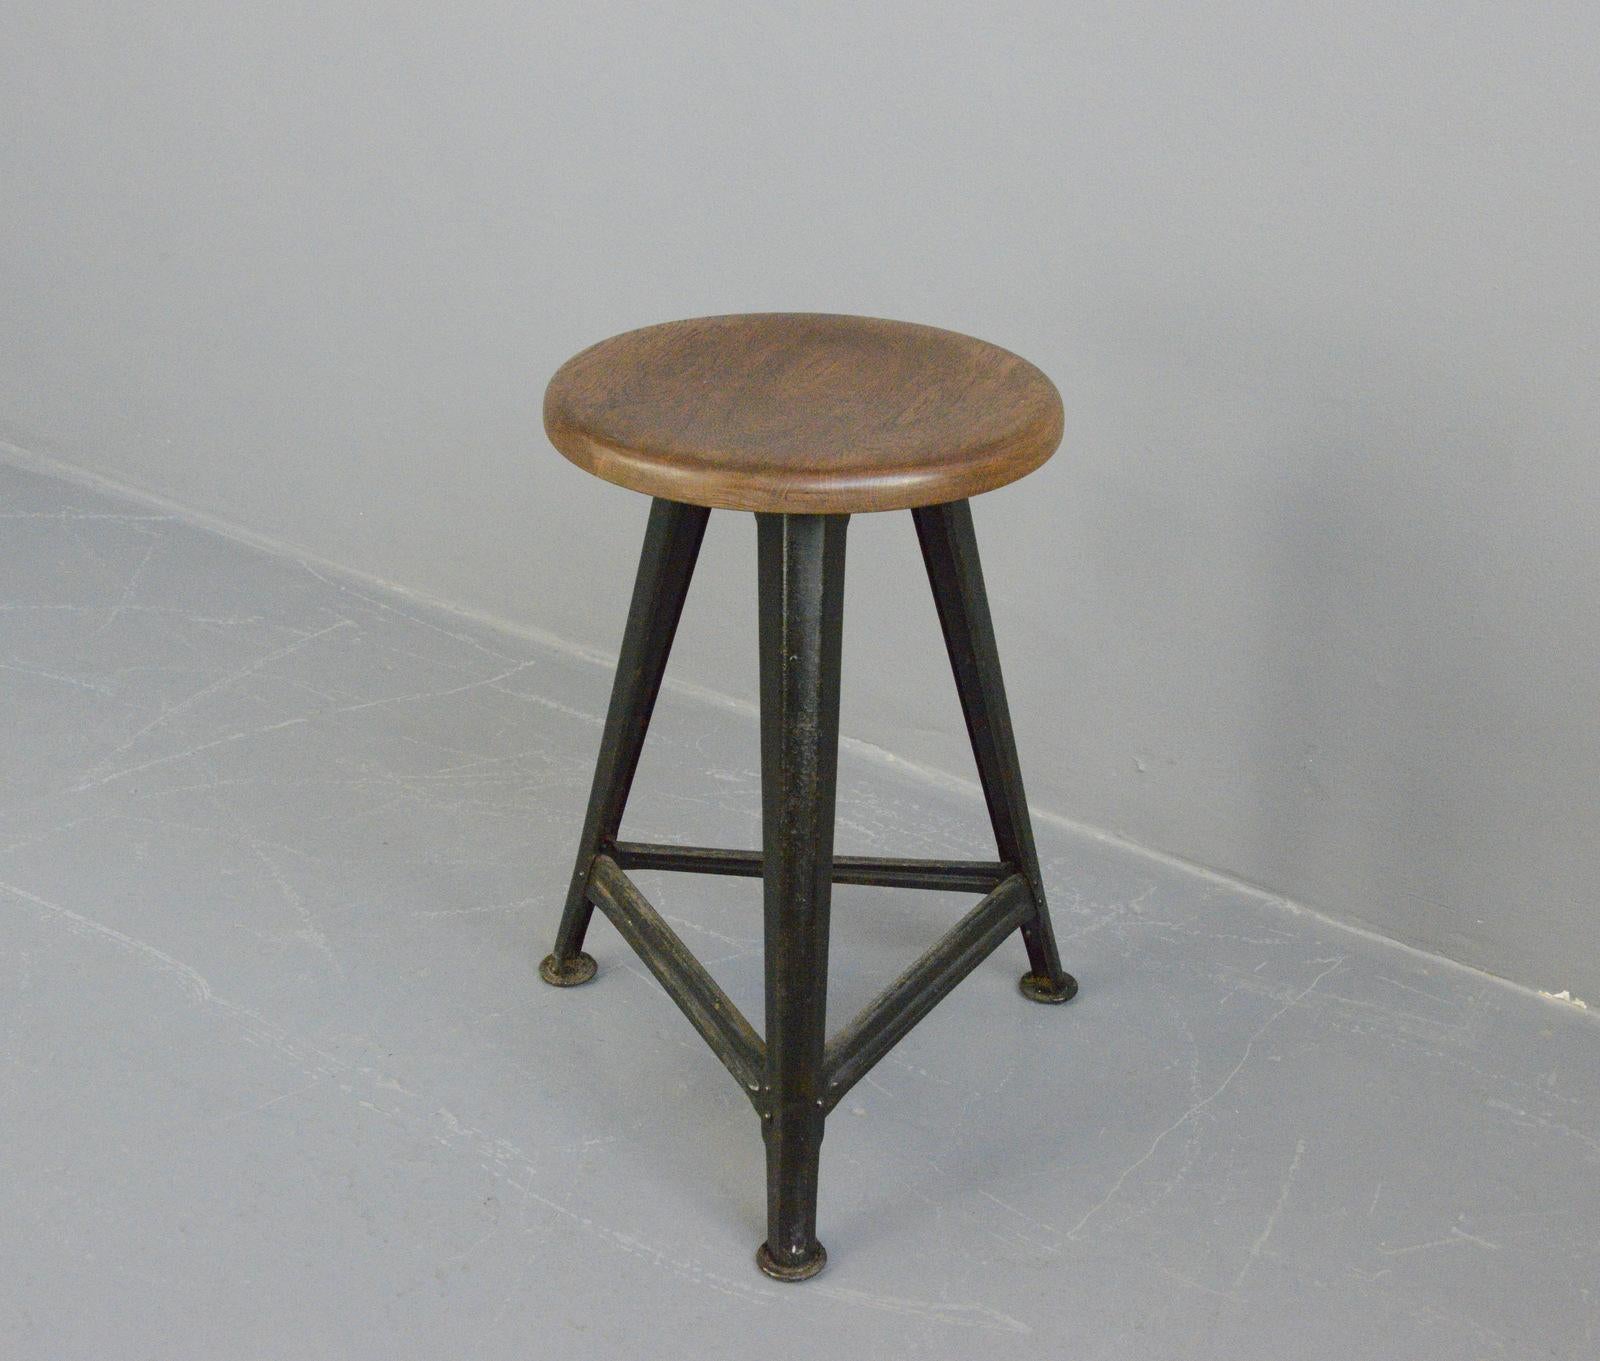 Industrial factory stool by Rowac, Circa 1930s

- Branded on the underneath in the centre of the base plate
- By Robert Wagner, Chemnitz
- German ~ 1930s
- 57cm tall x 35cm wide

Rowac

Robert Wagner’s founded his company in 1888 in